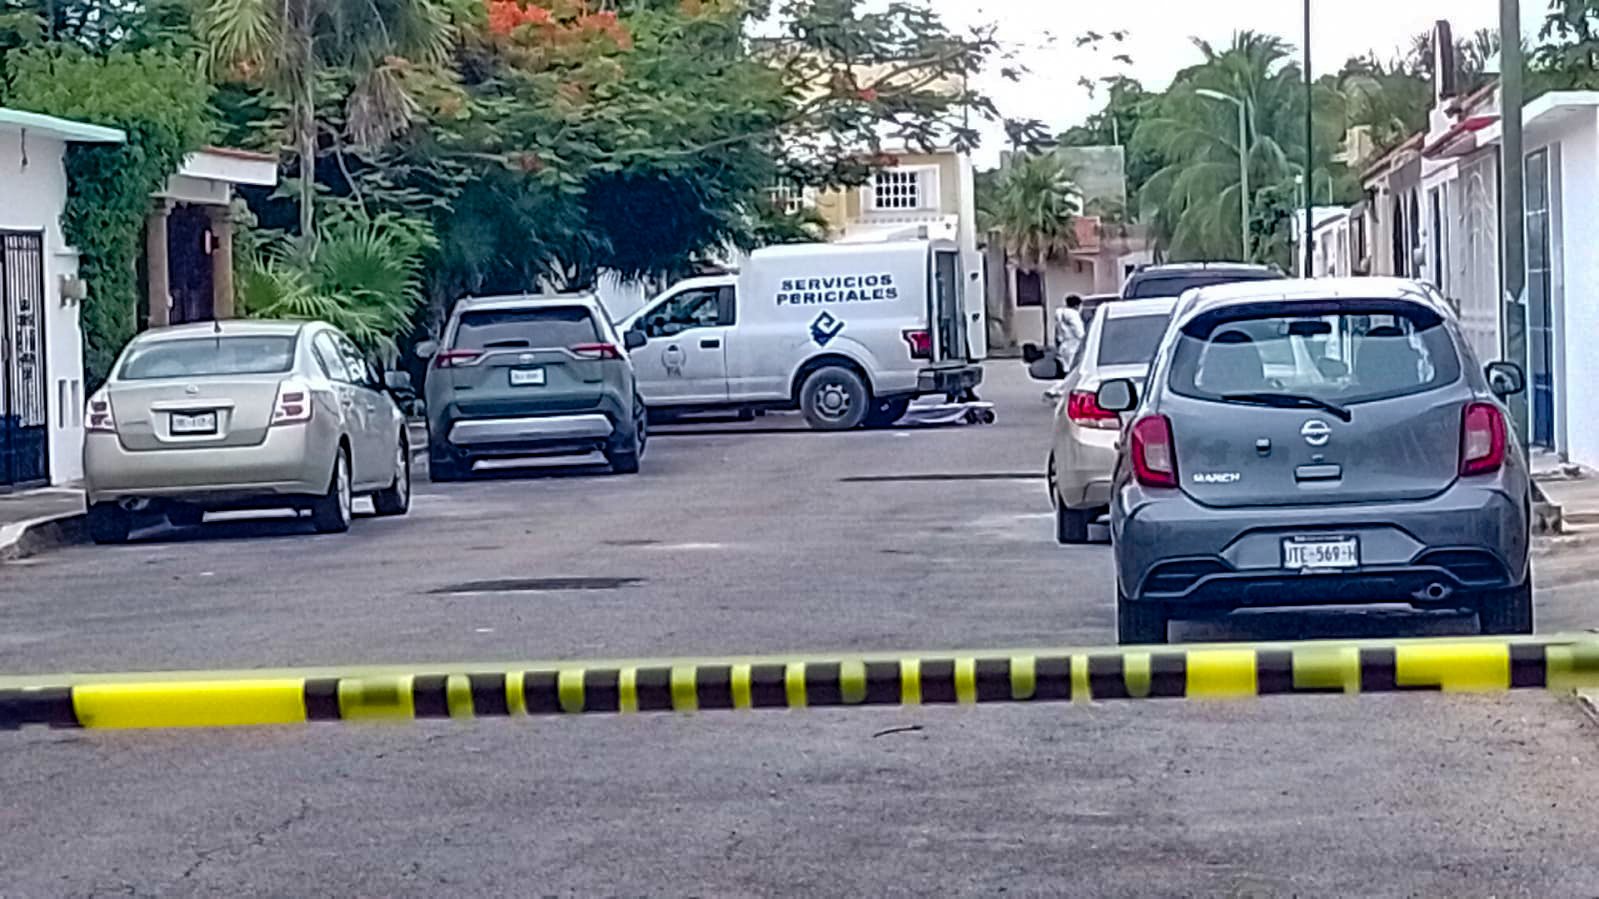 "El Wachi" He was identified as the person responsible for several attacks on vares in the entity (Photo: Special)